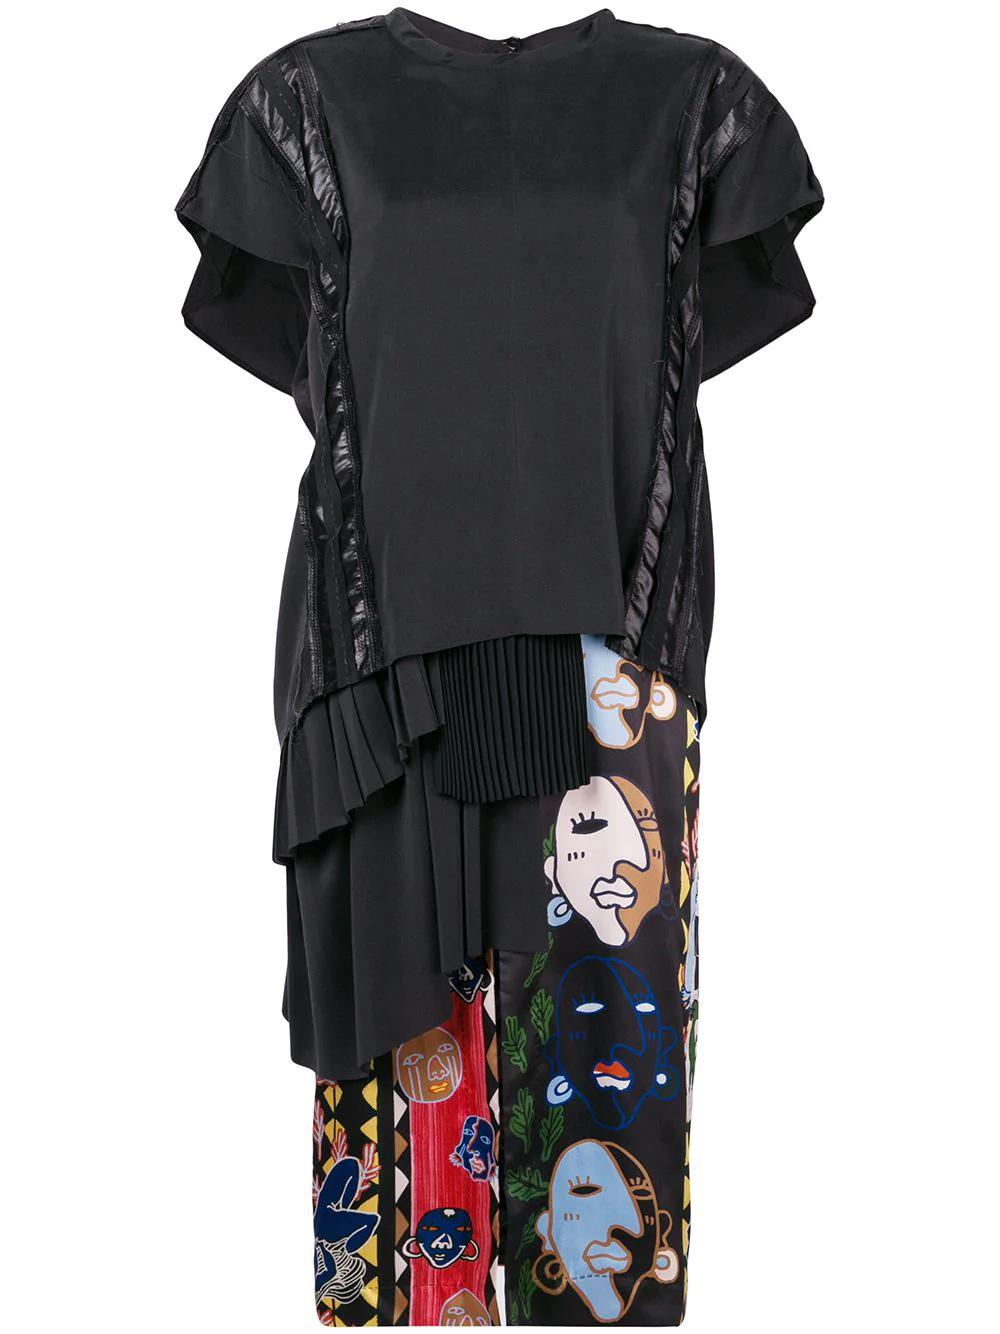 mid-length T-shirt dress by CARVEN